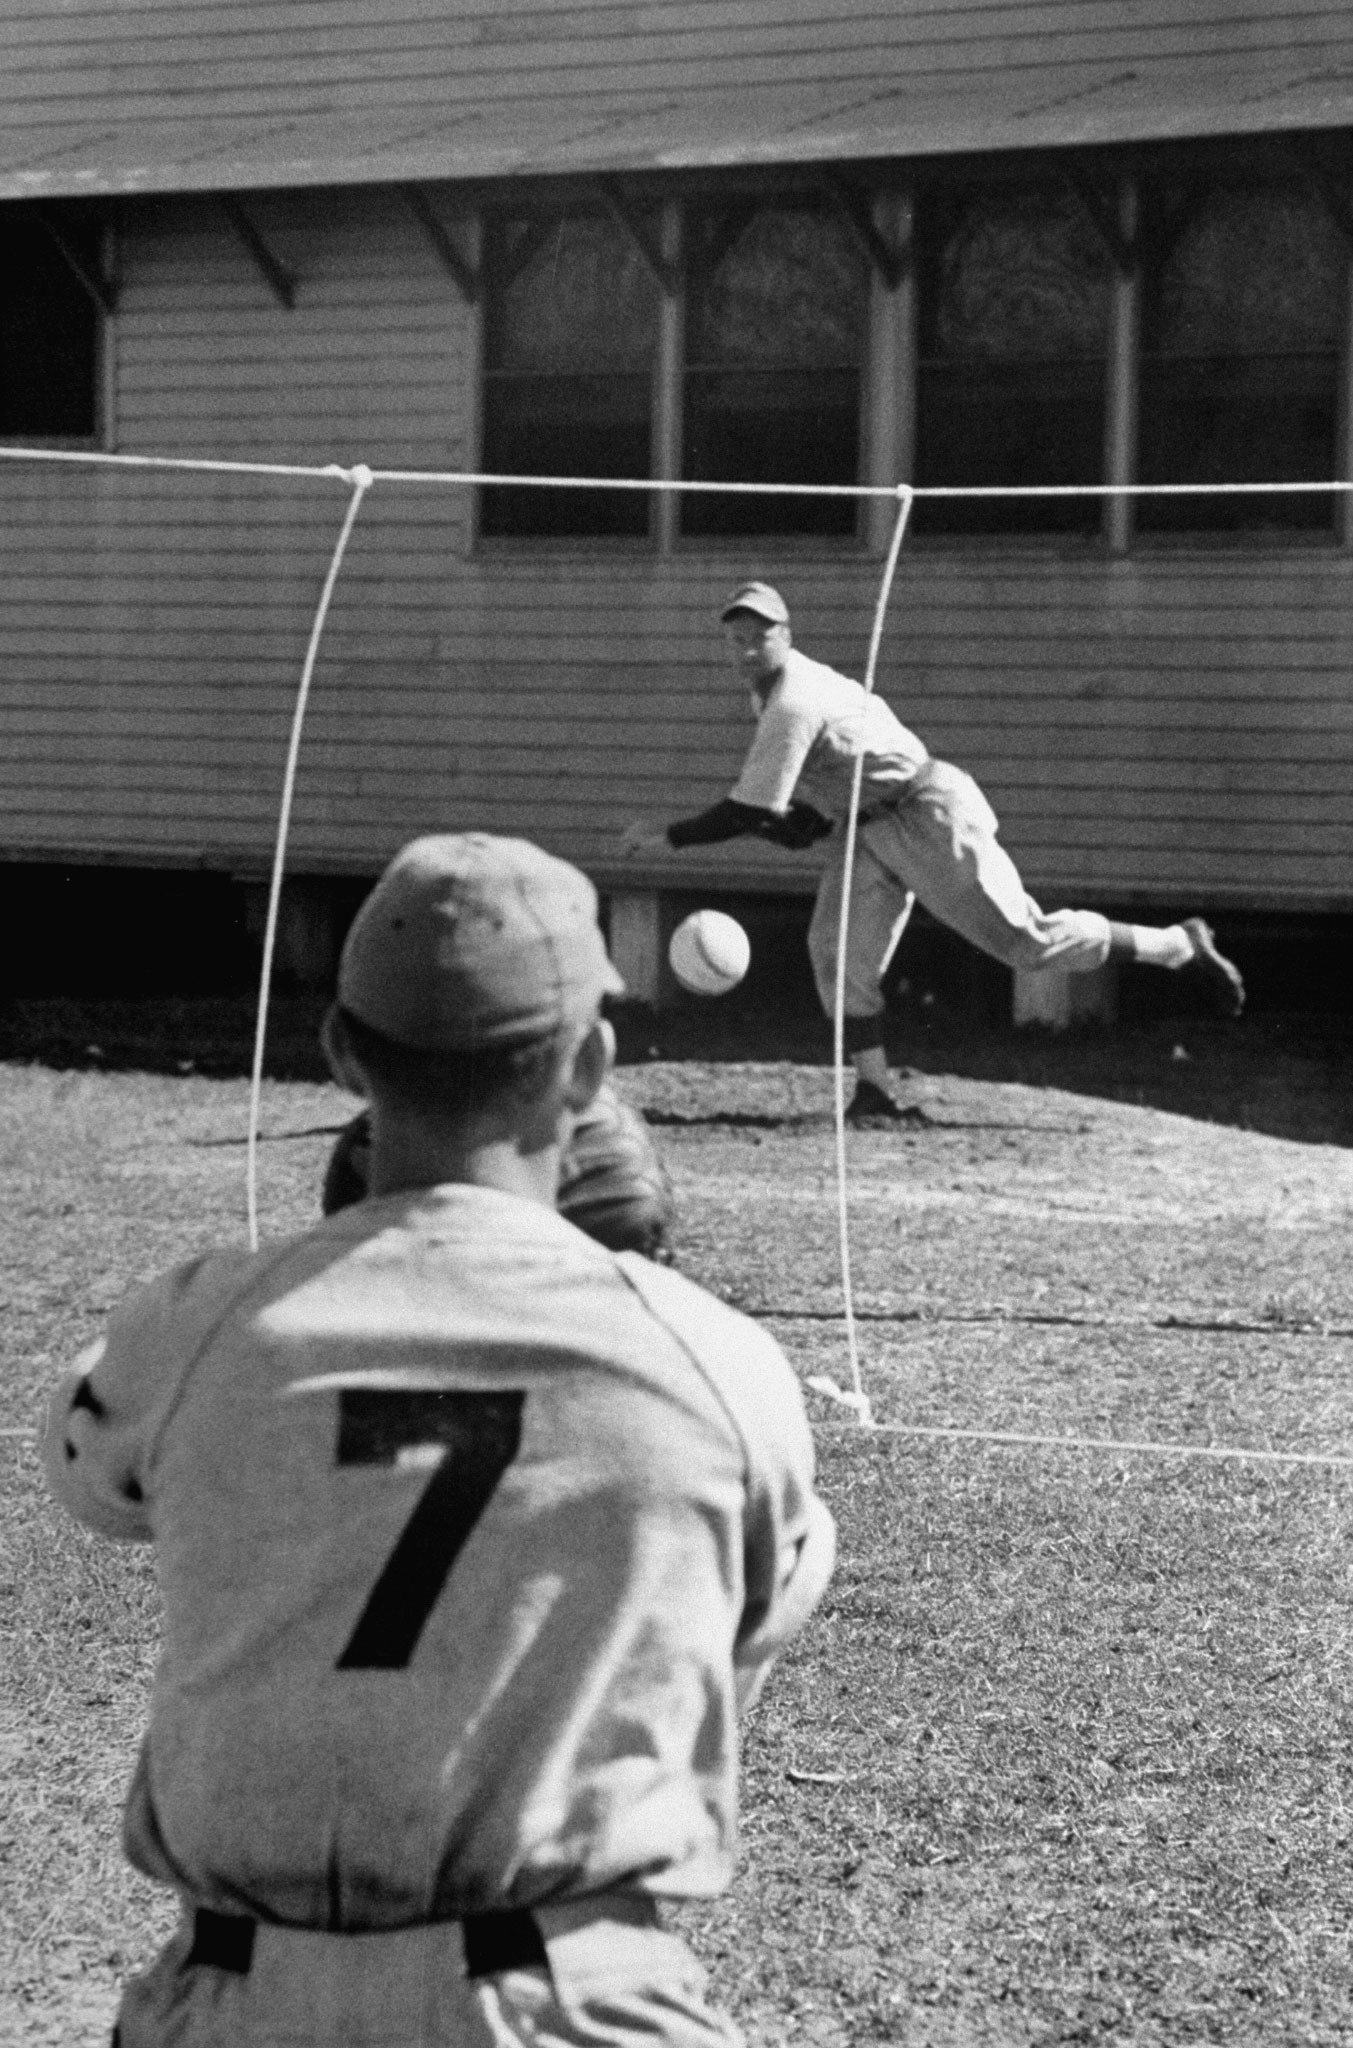 With strings marking the strike zone, a pitcher practices during spring training at Dodgertown, Vero Beach, Fla., 1948.